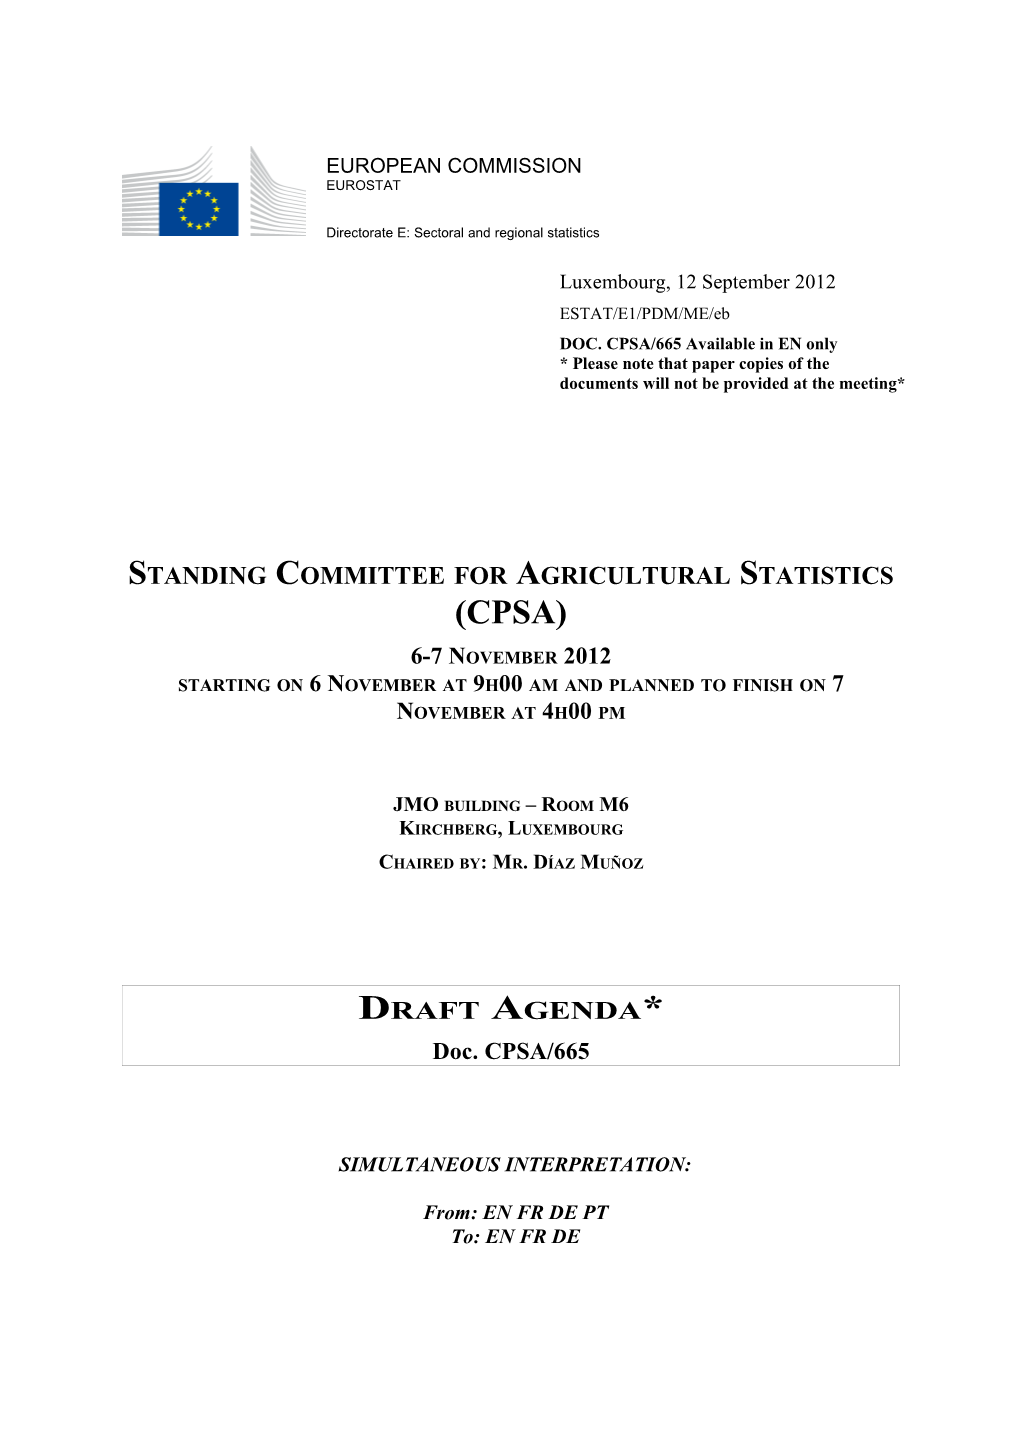 Standing Committee for Agricultural Statistics (CPSA)